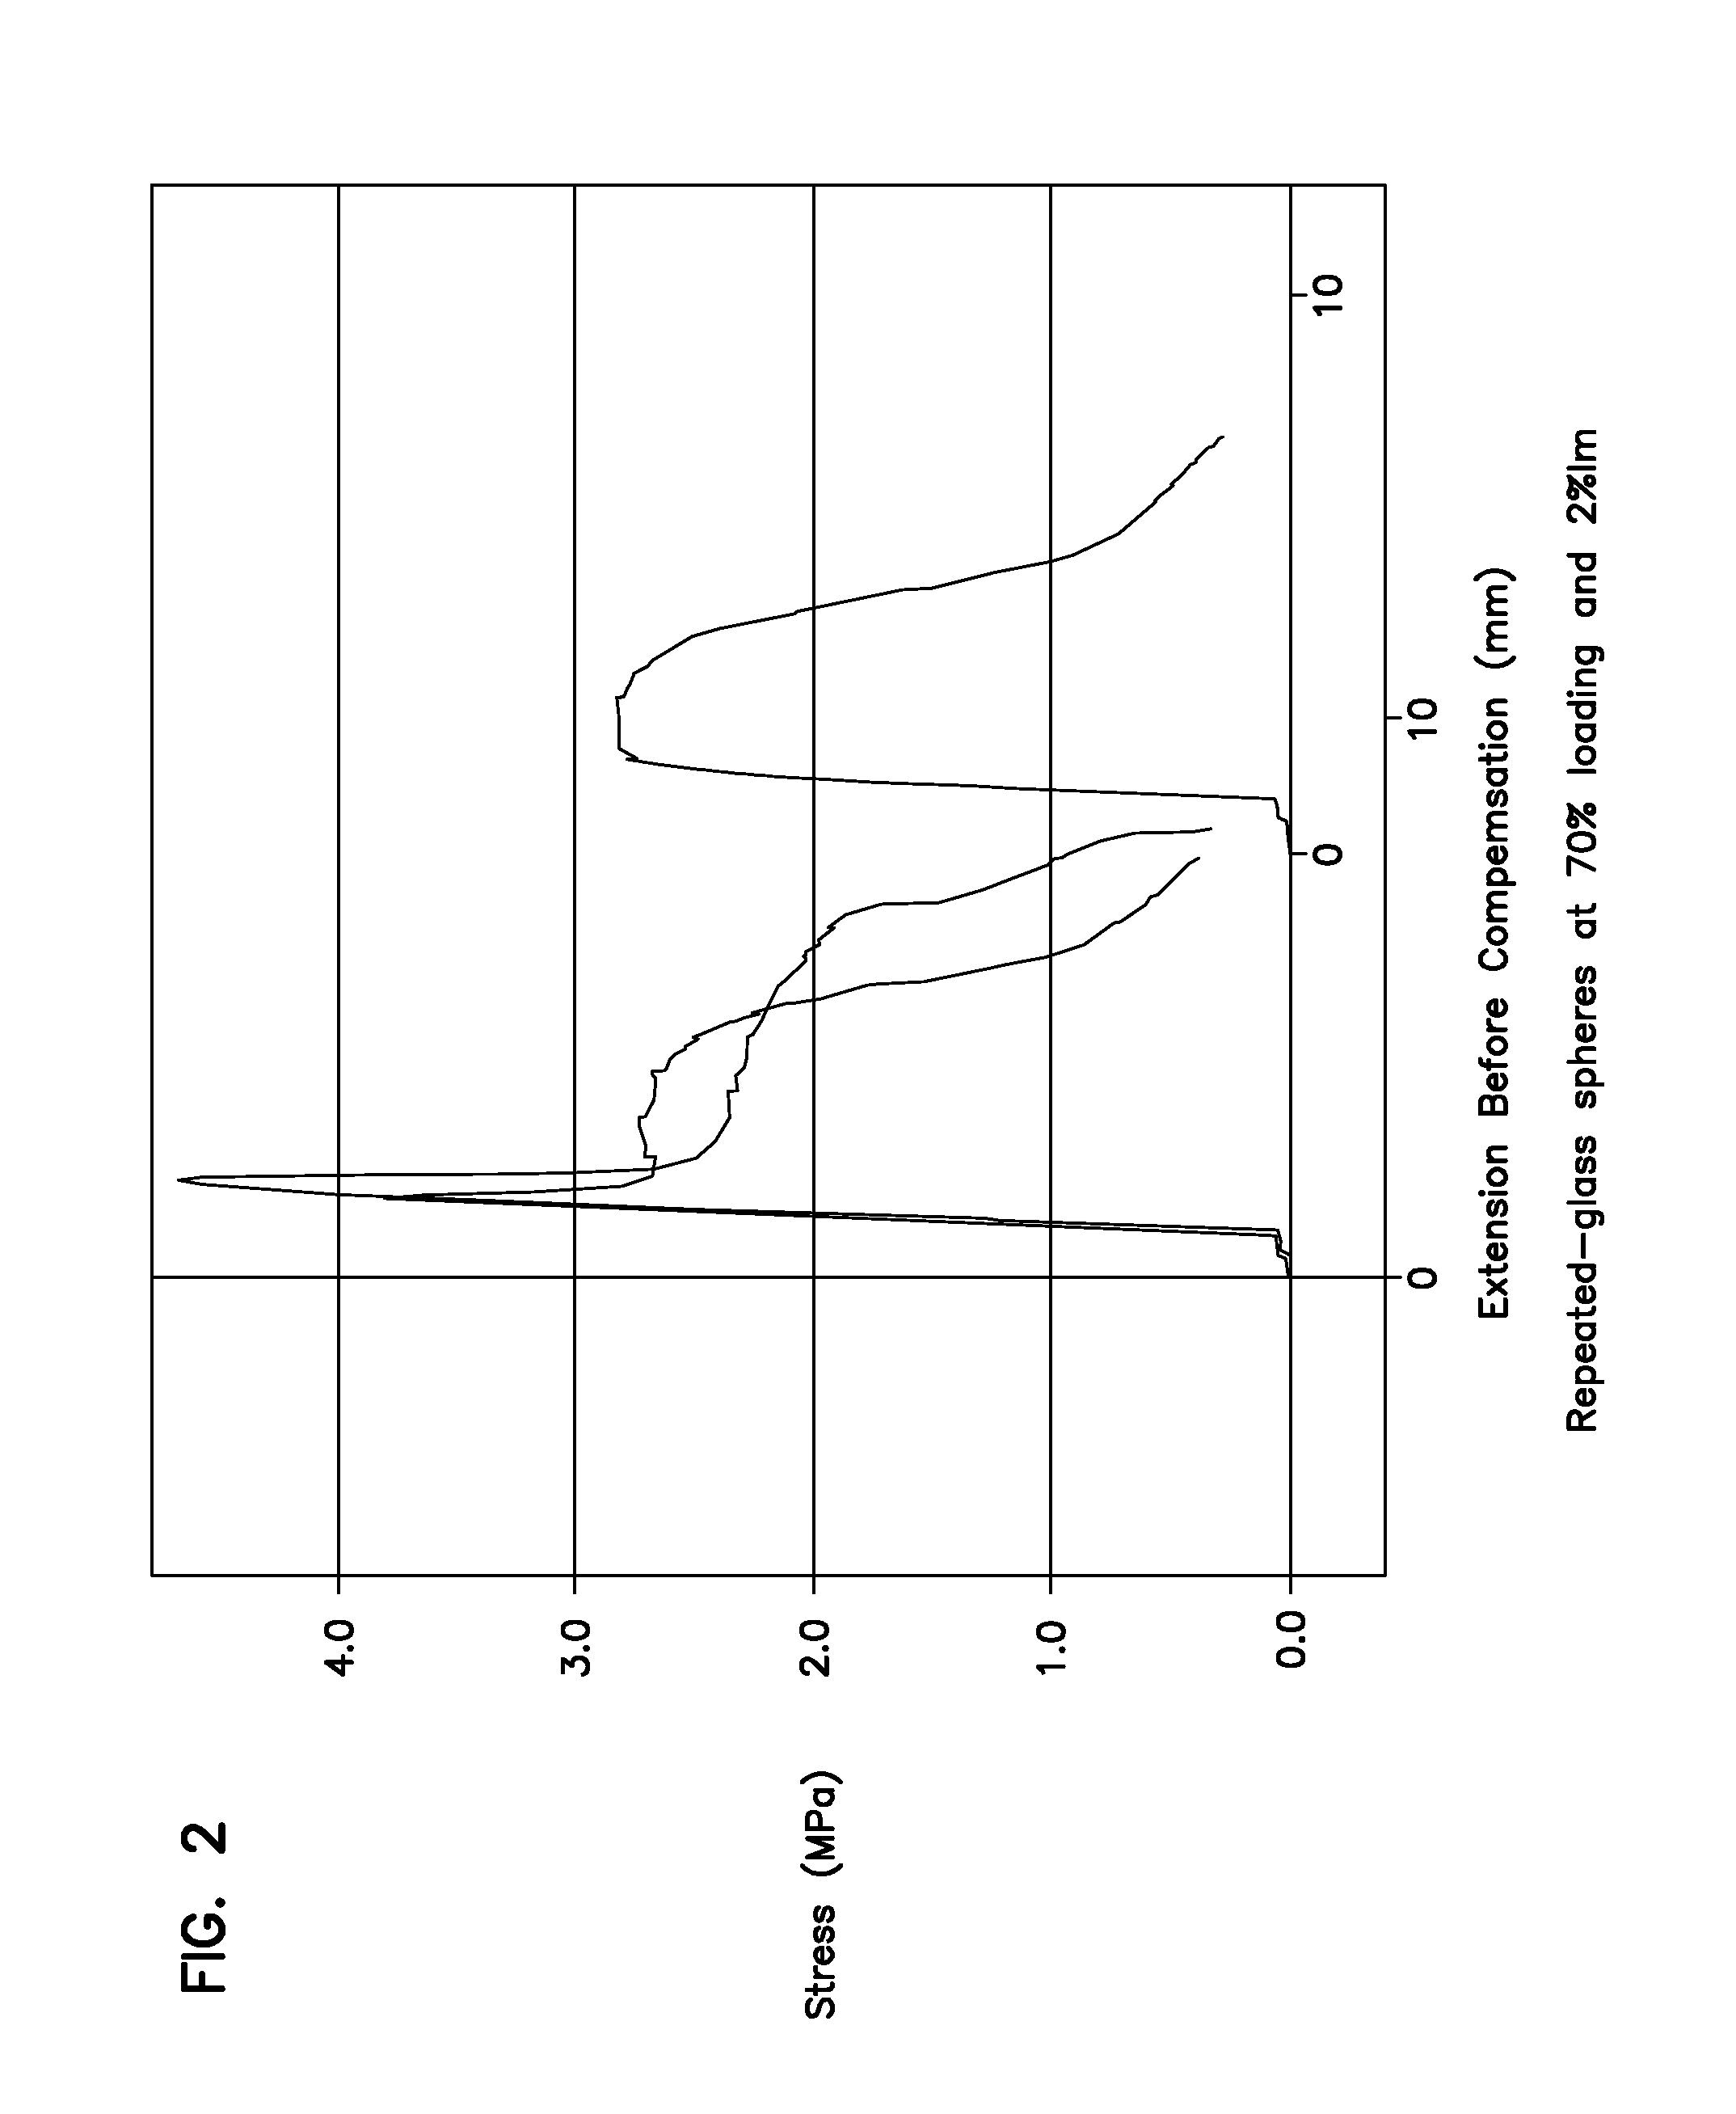 Reduced Density Glass Bubble Polymer Composite